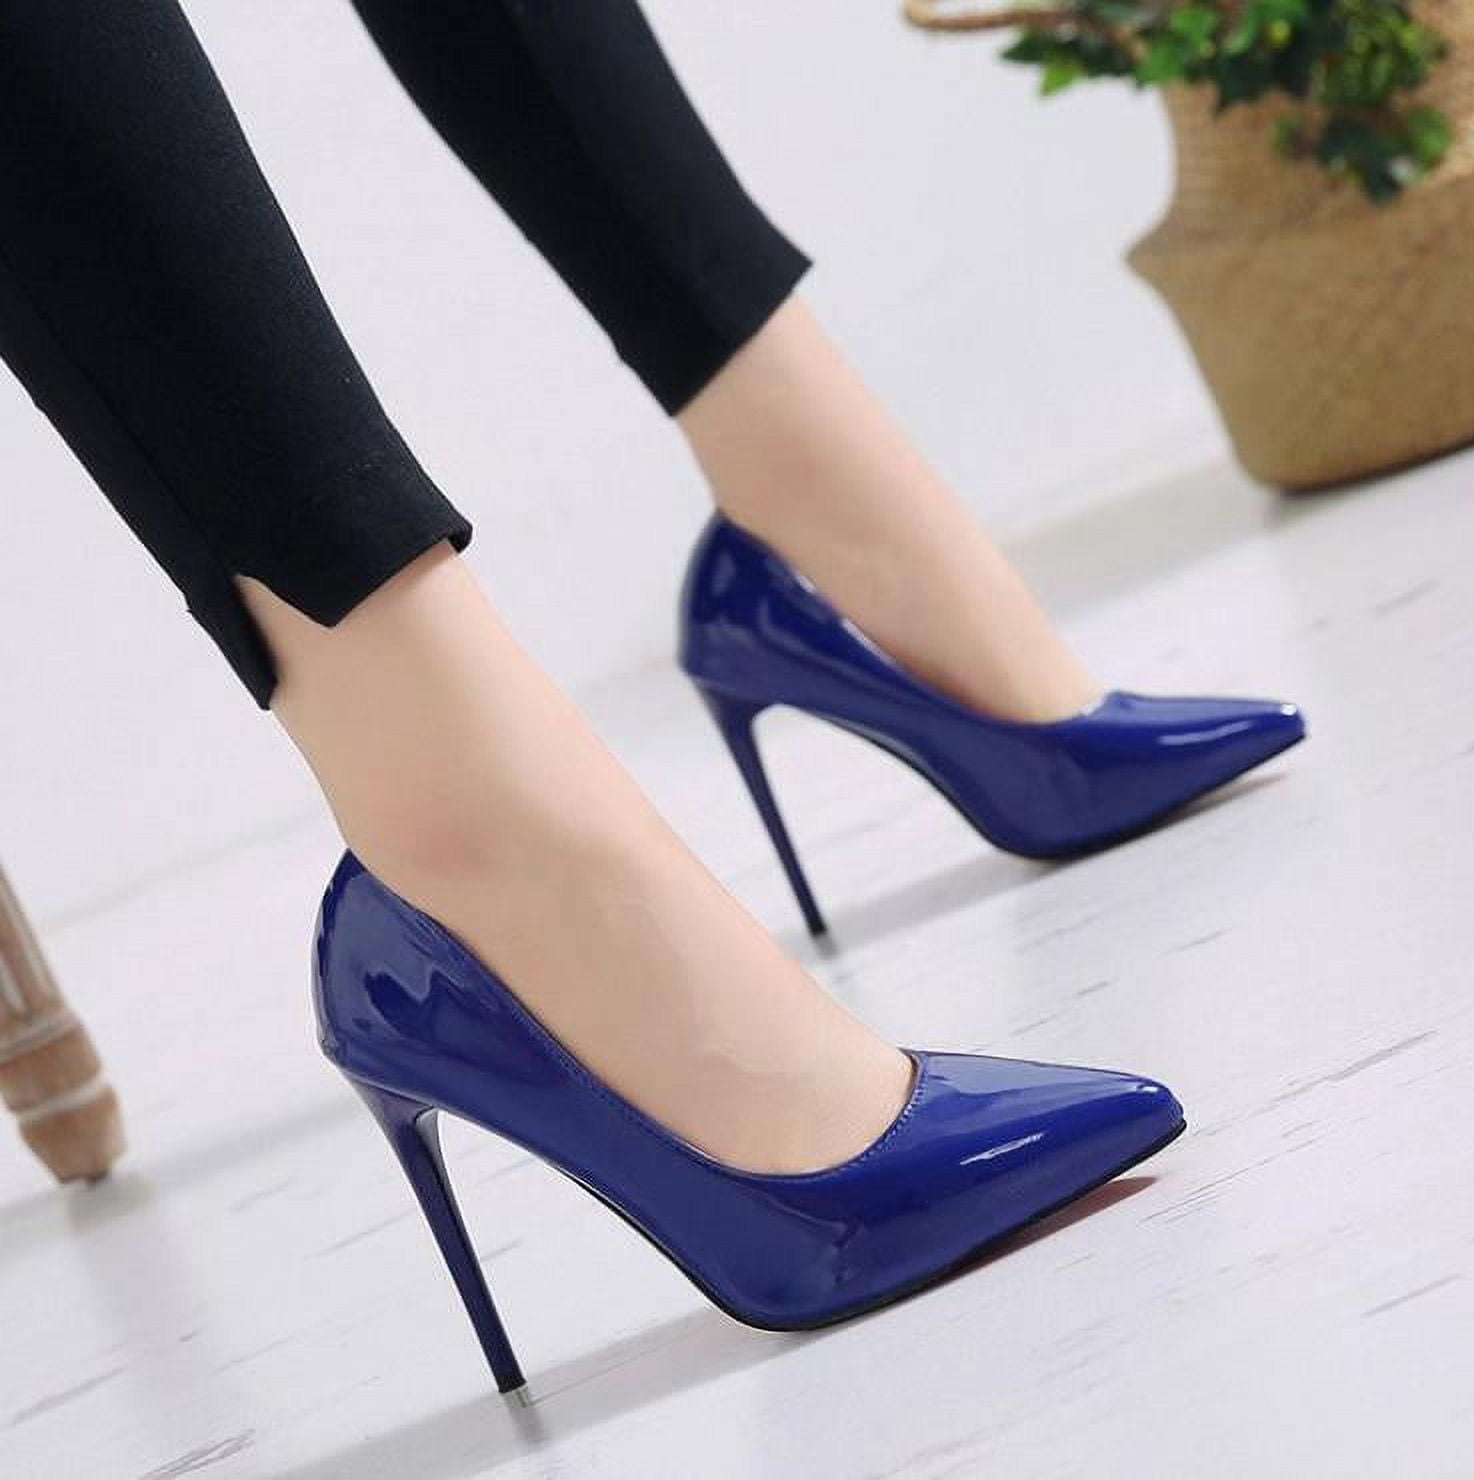 White Heels Pointed Toe Shallow Mouth Sexy Pumps Red Bottom High Heels  Bridal Shoes With Little Heel Luxury Singles Shoes